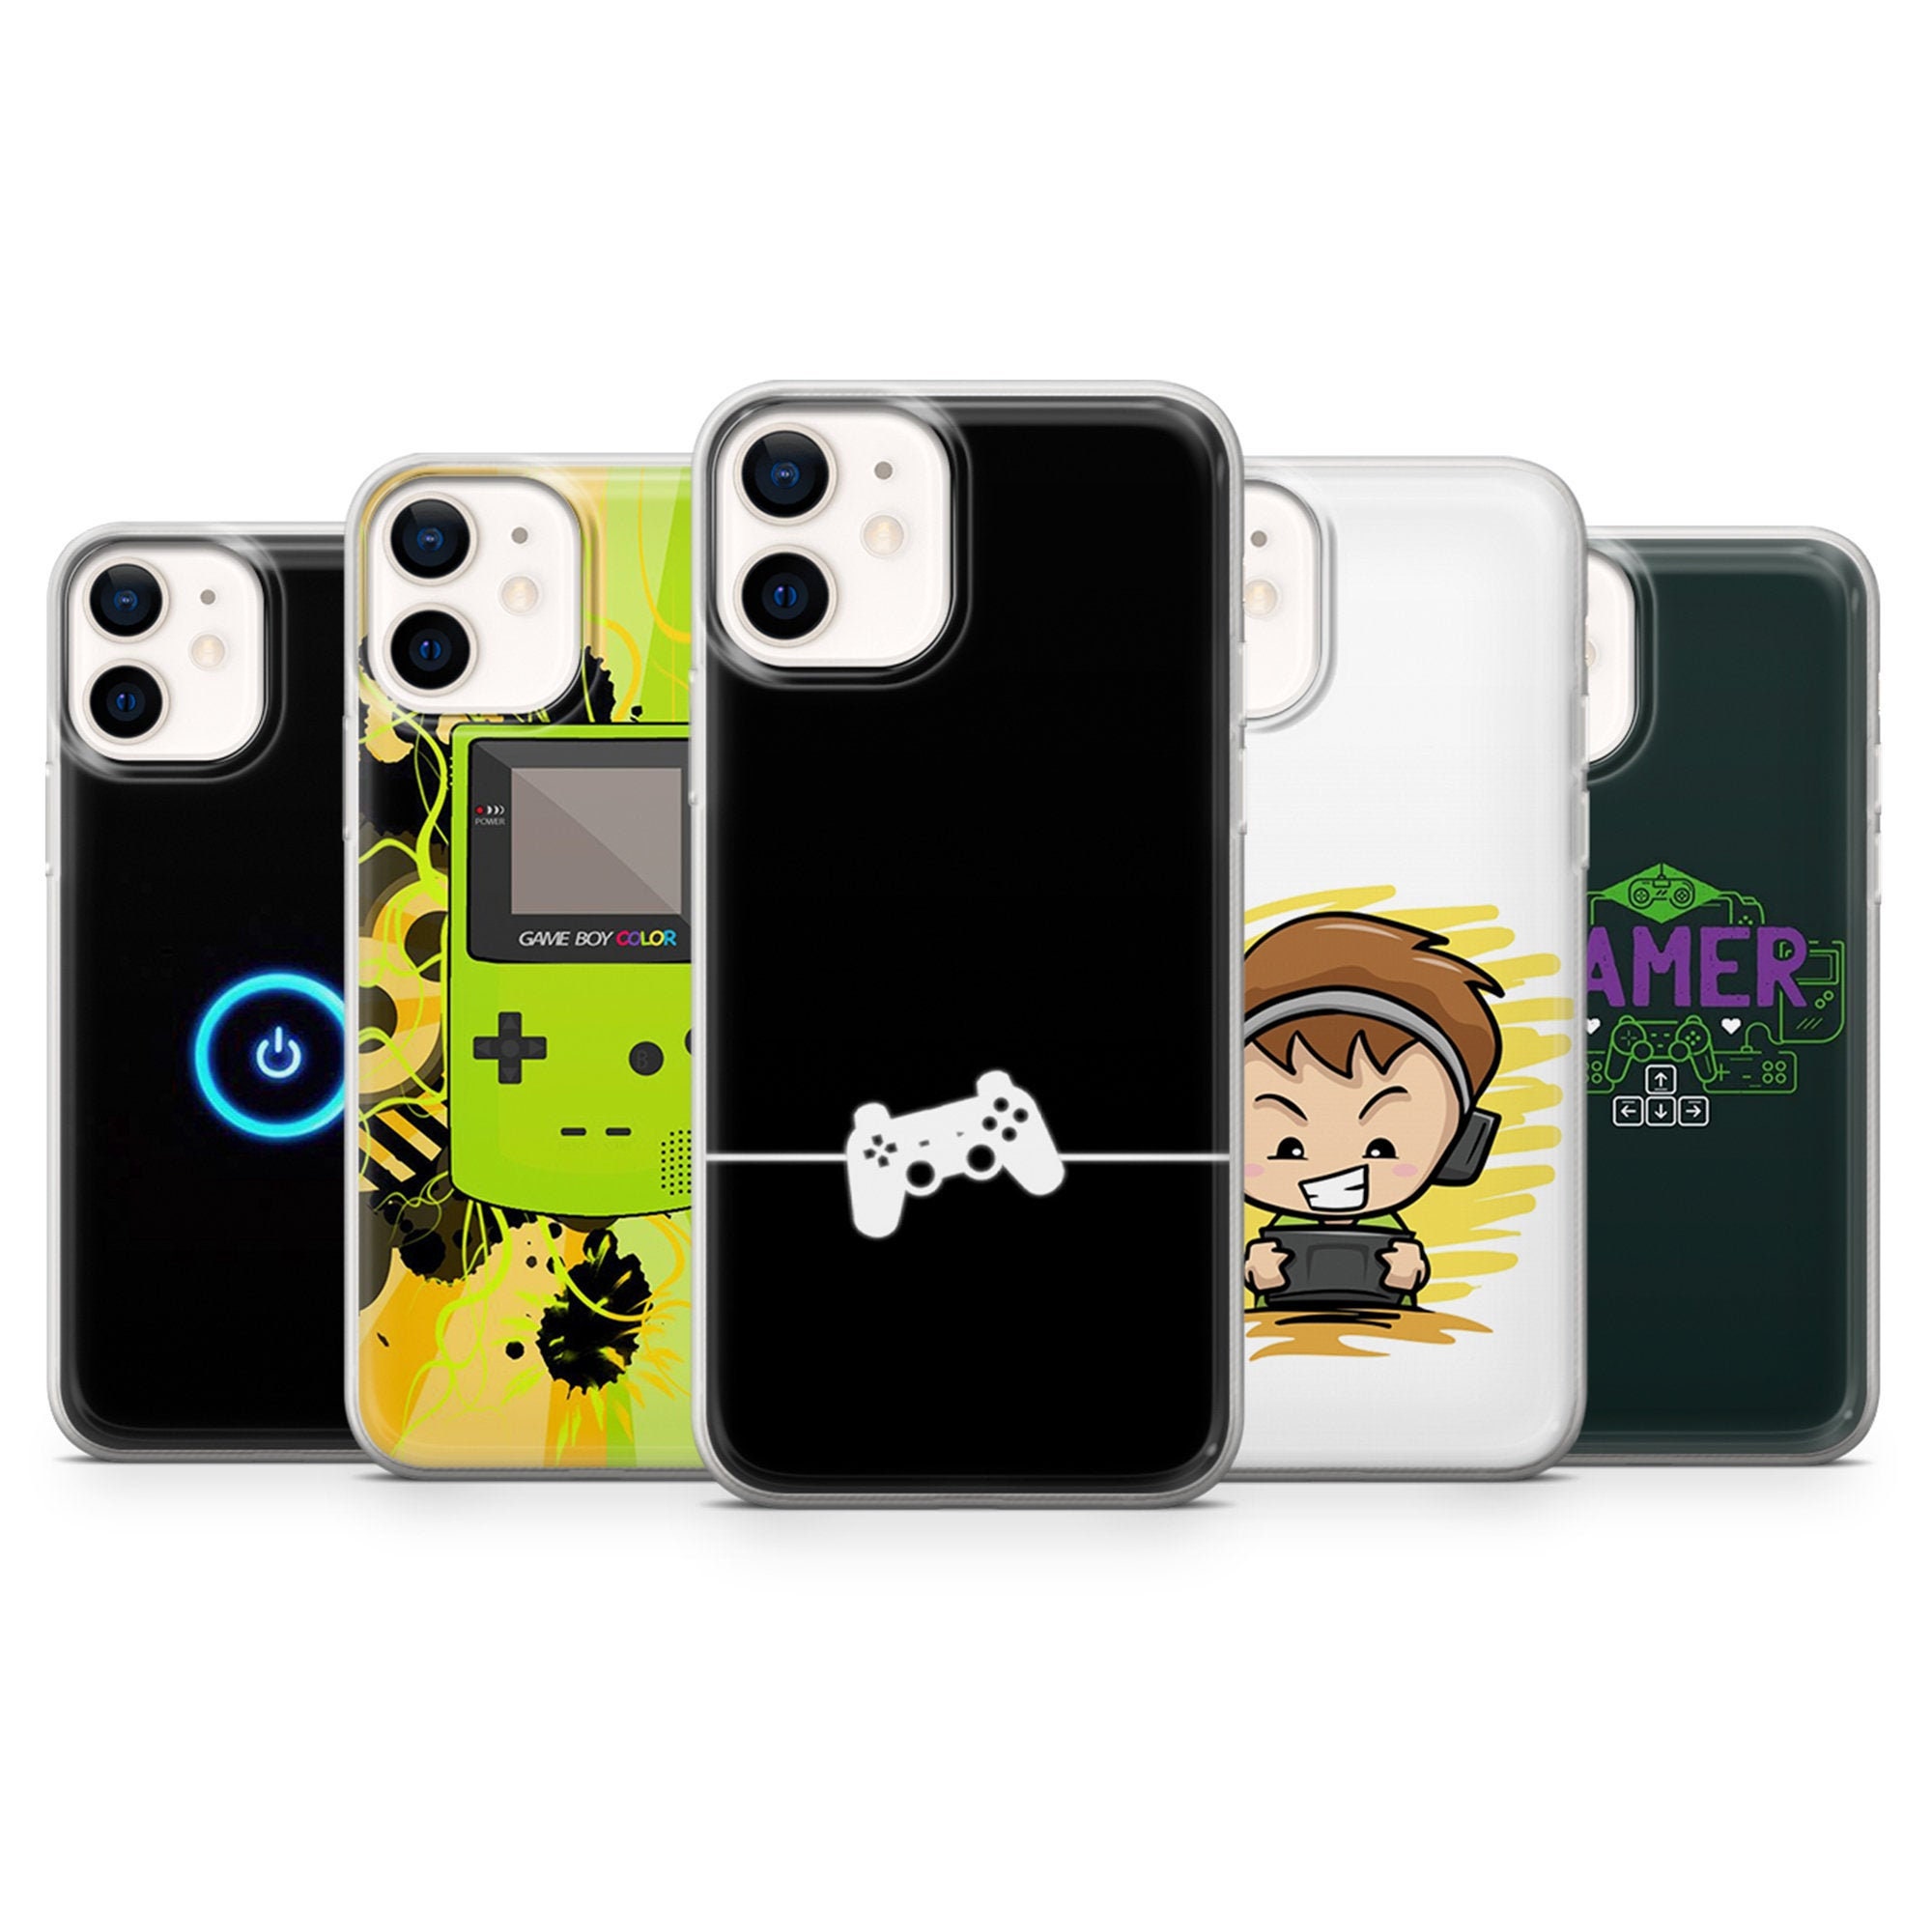 ROBLOX FAMILY iPhone 11 Case